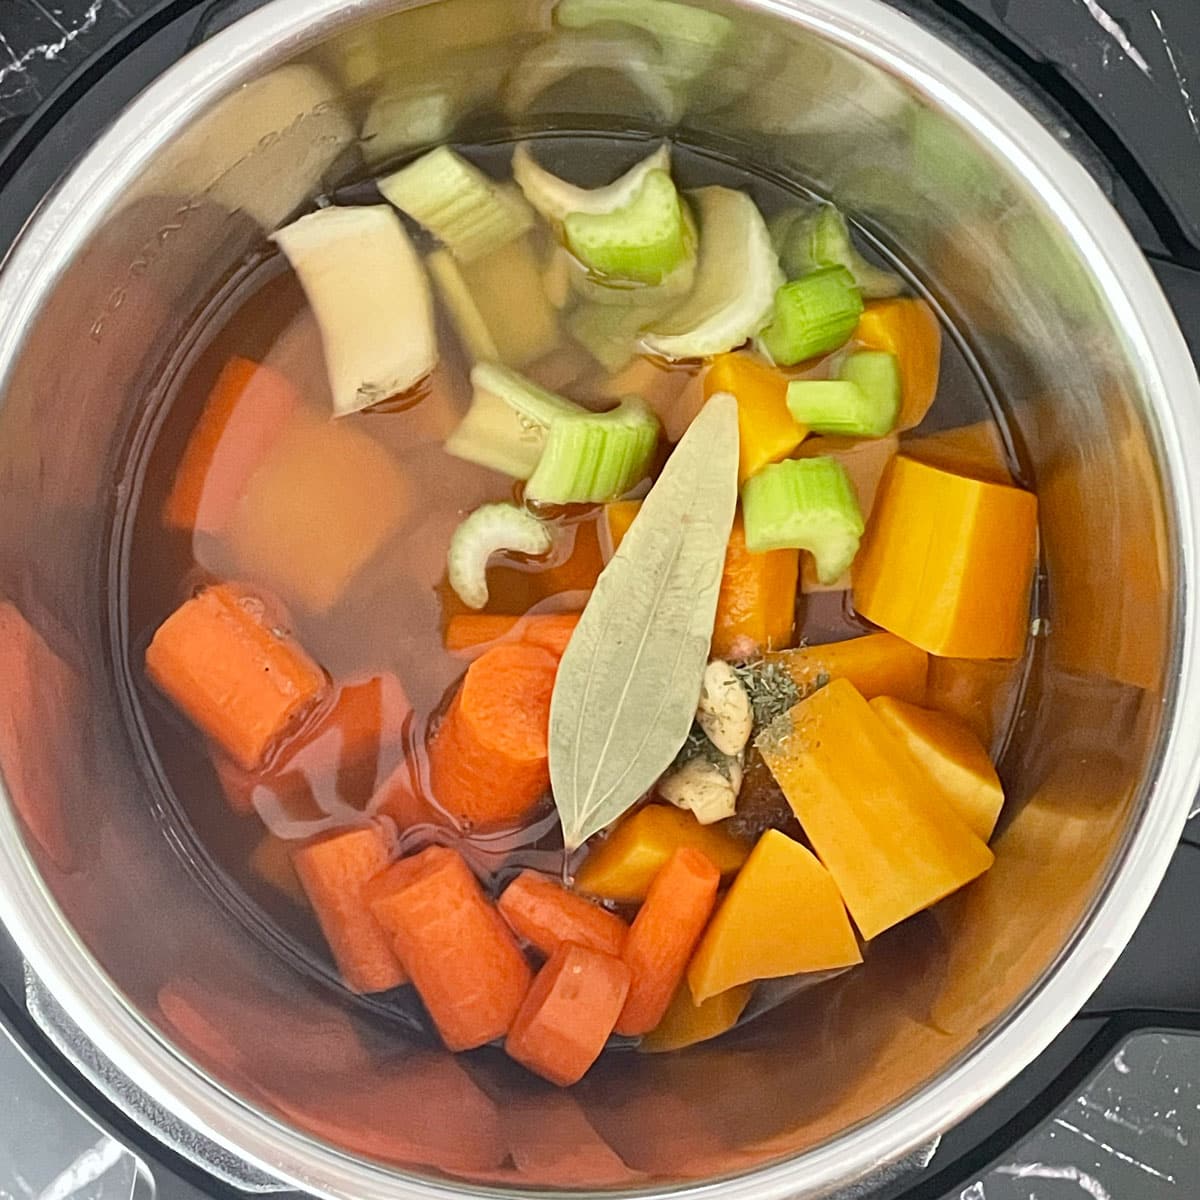 Butternut squash chopped ingredients in Instant pot liner.